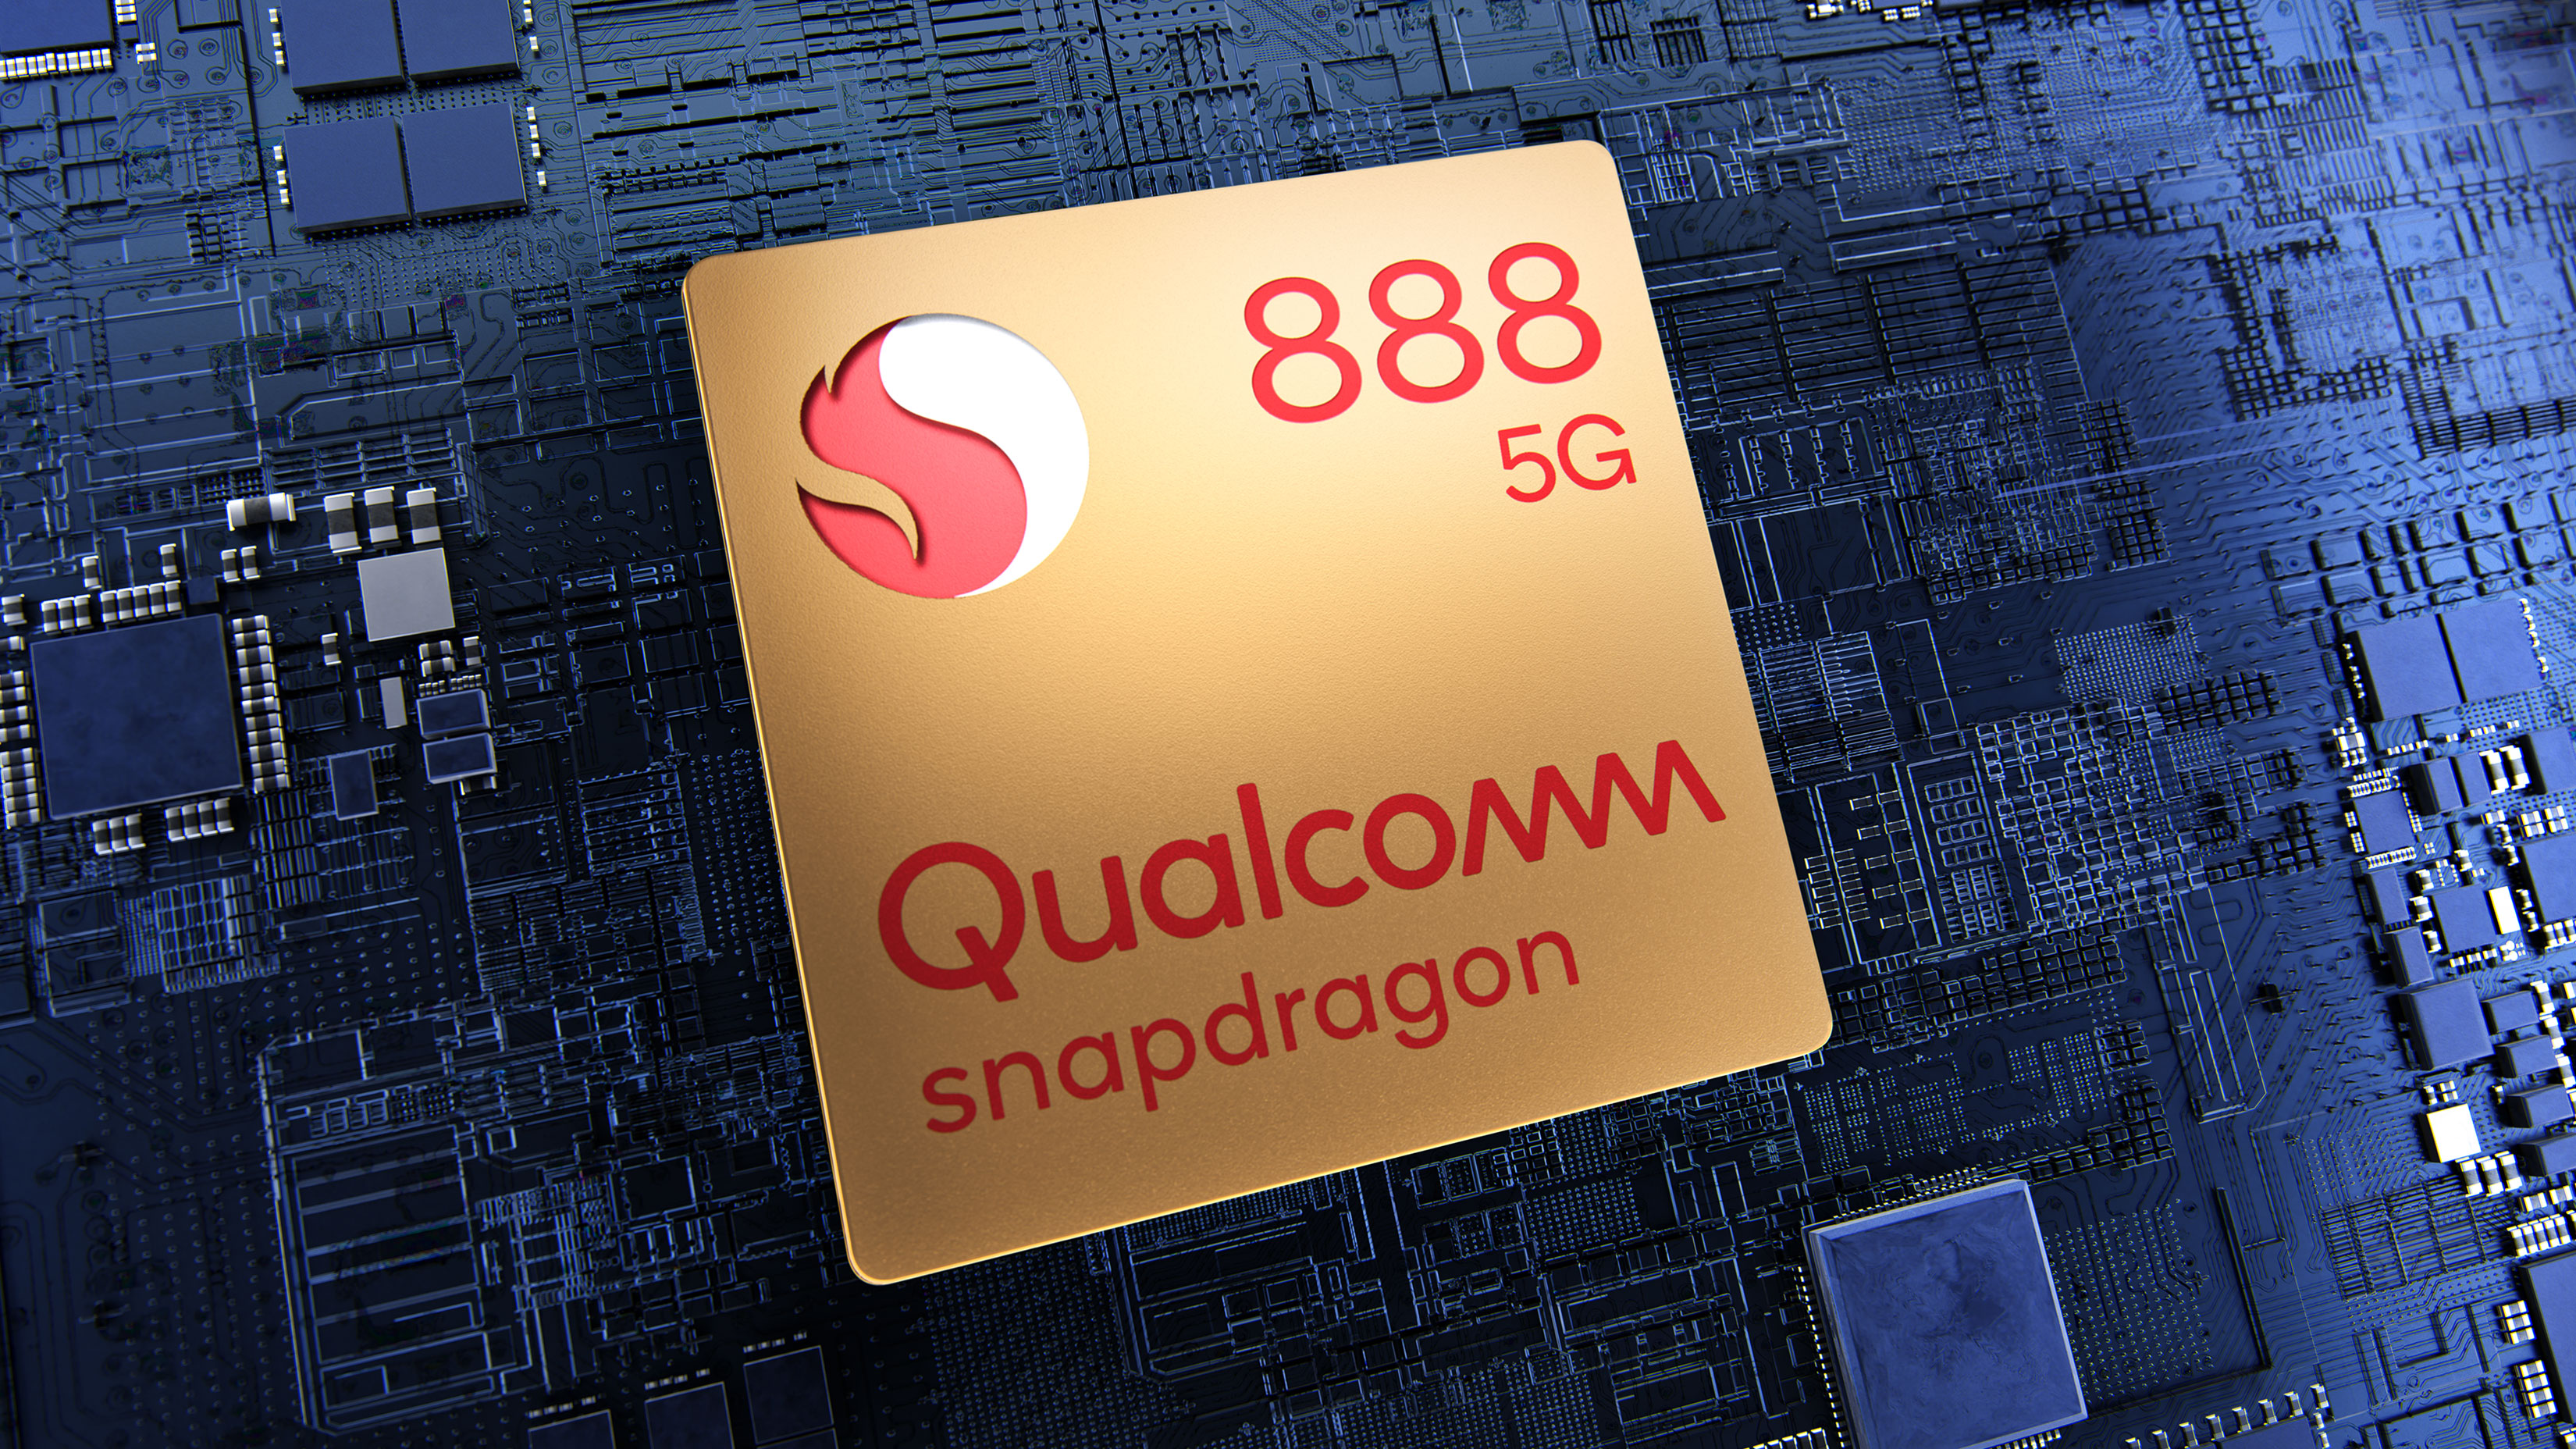 An image of a circuit board and a Snapdragon 888 logo